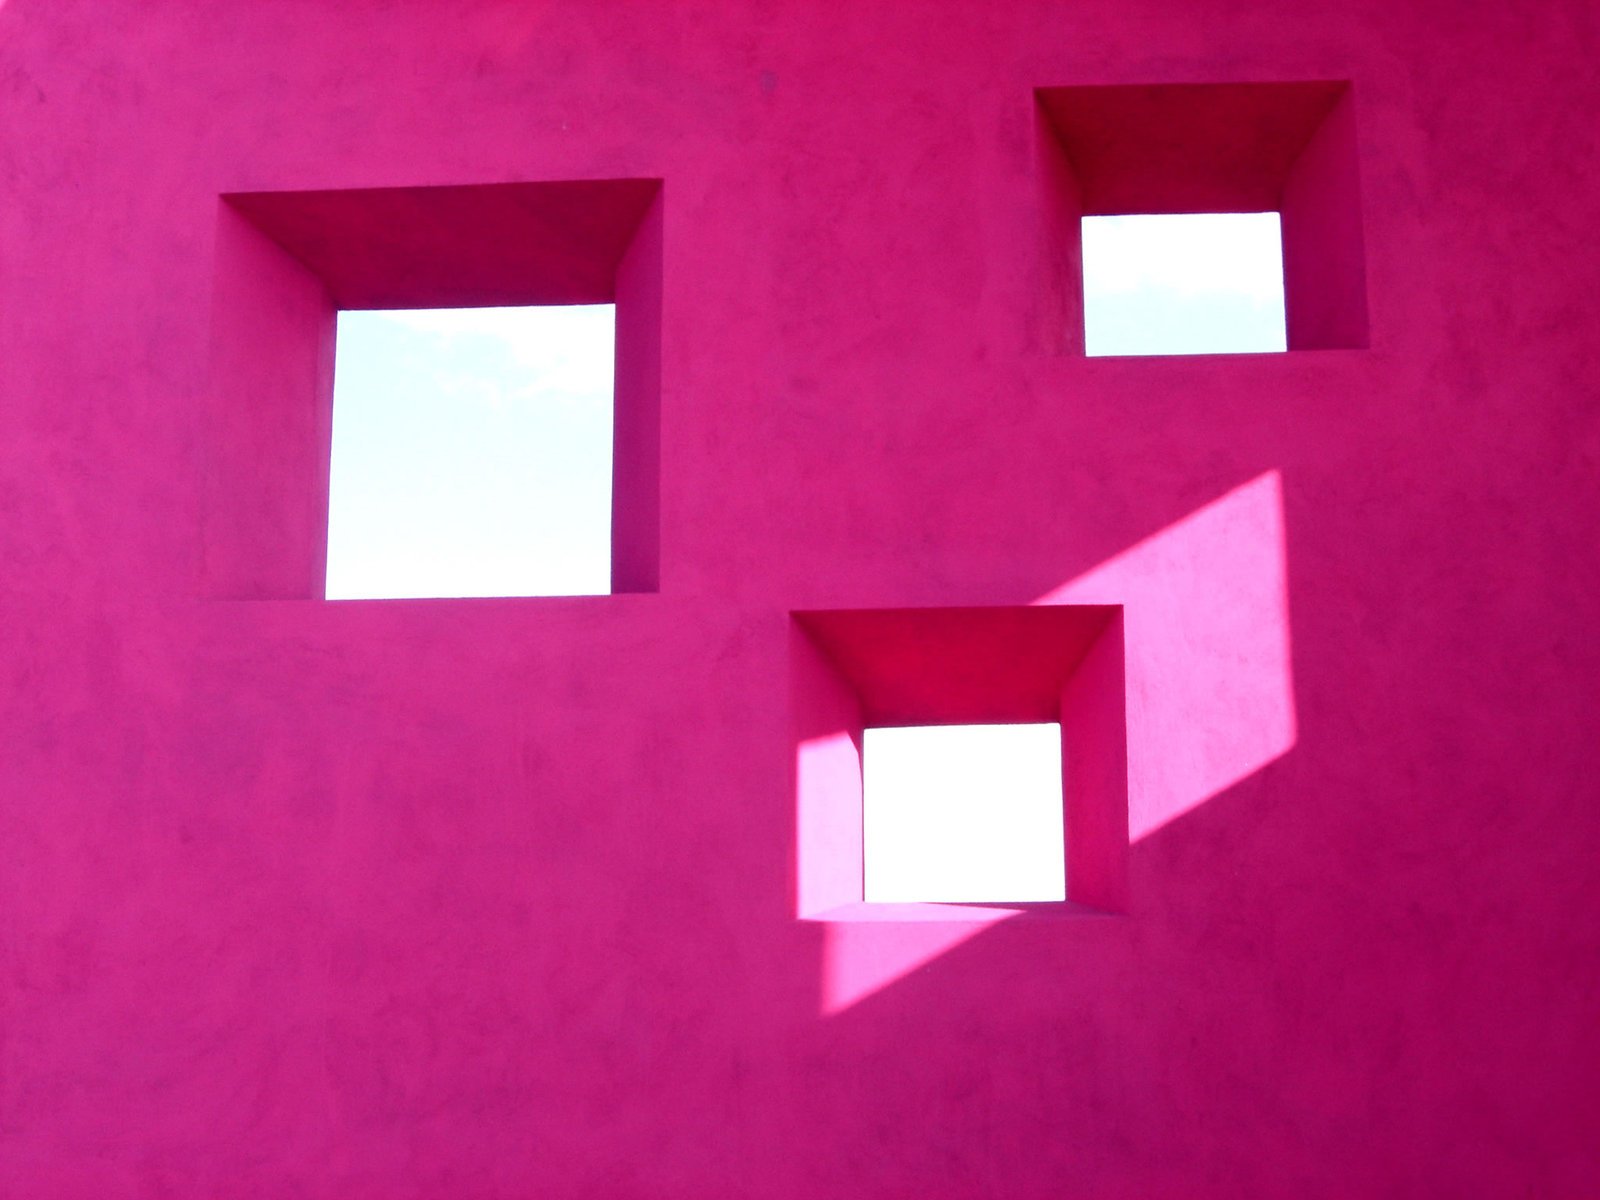 an abstract picture of three square windows on pink background